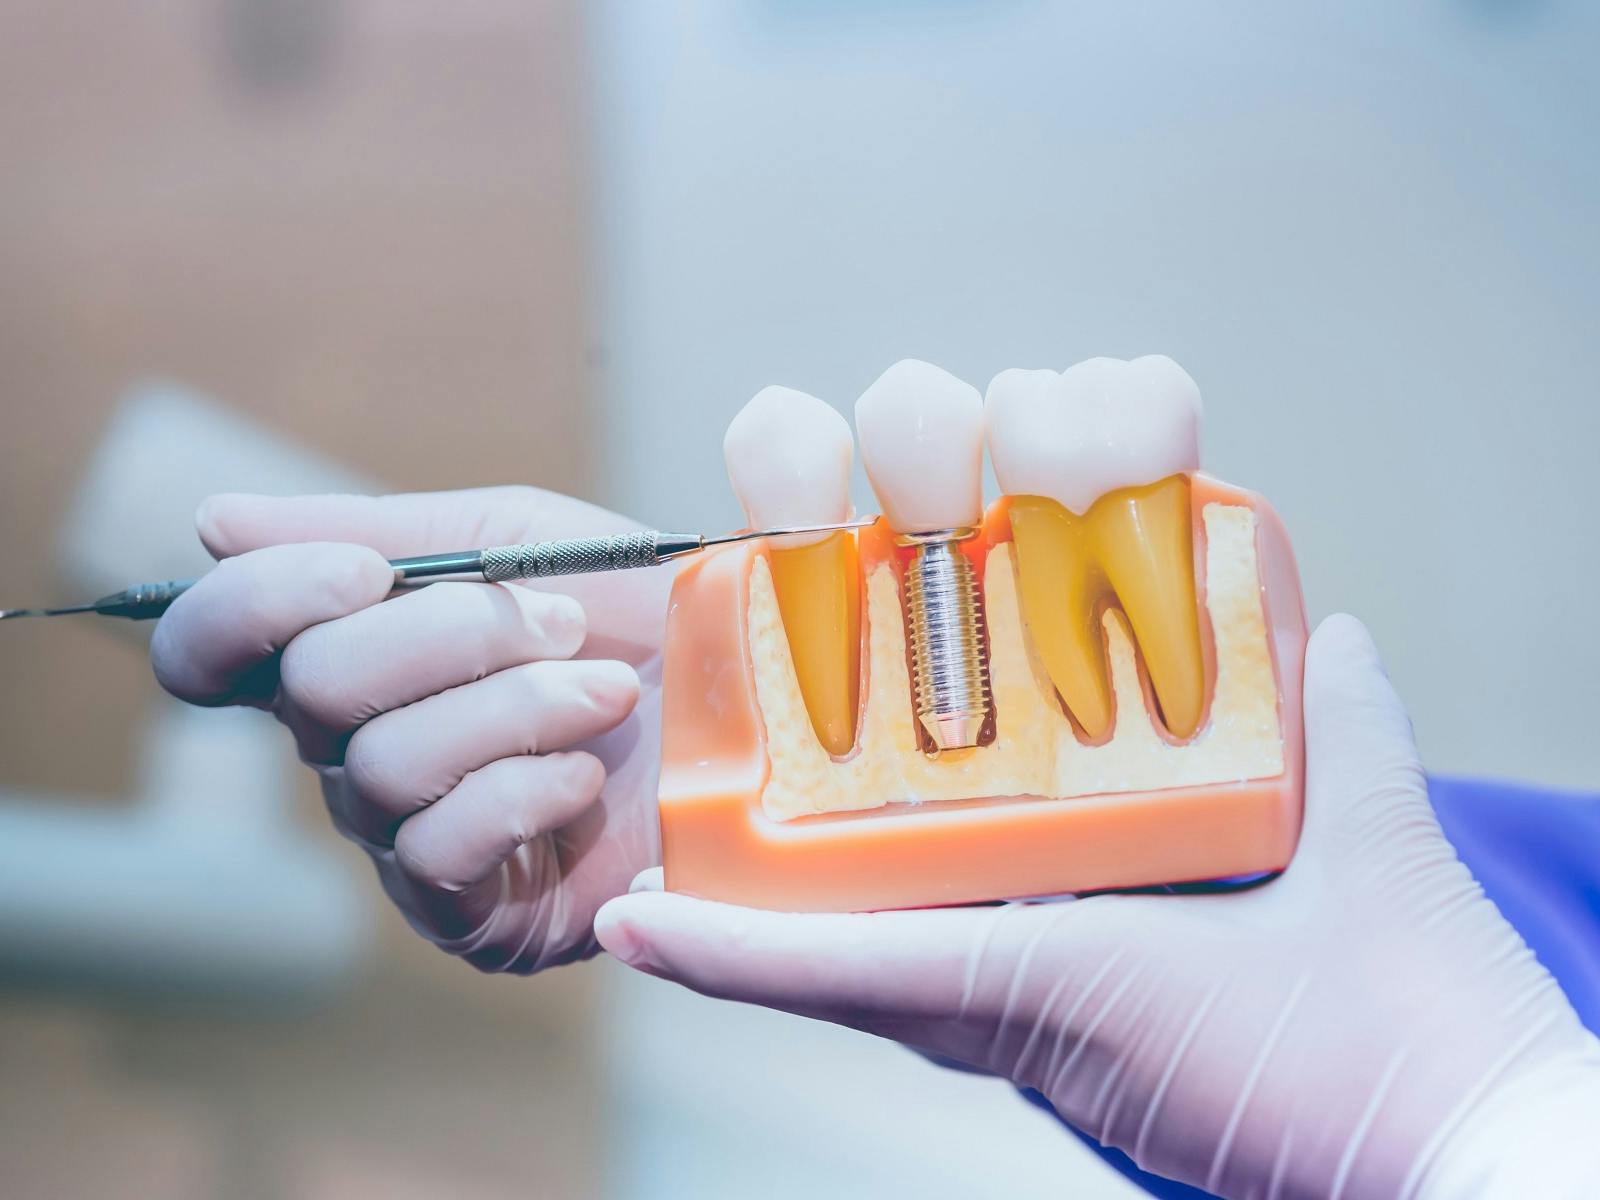 Are Dental Implants Covered Under Medicaid?